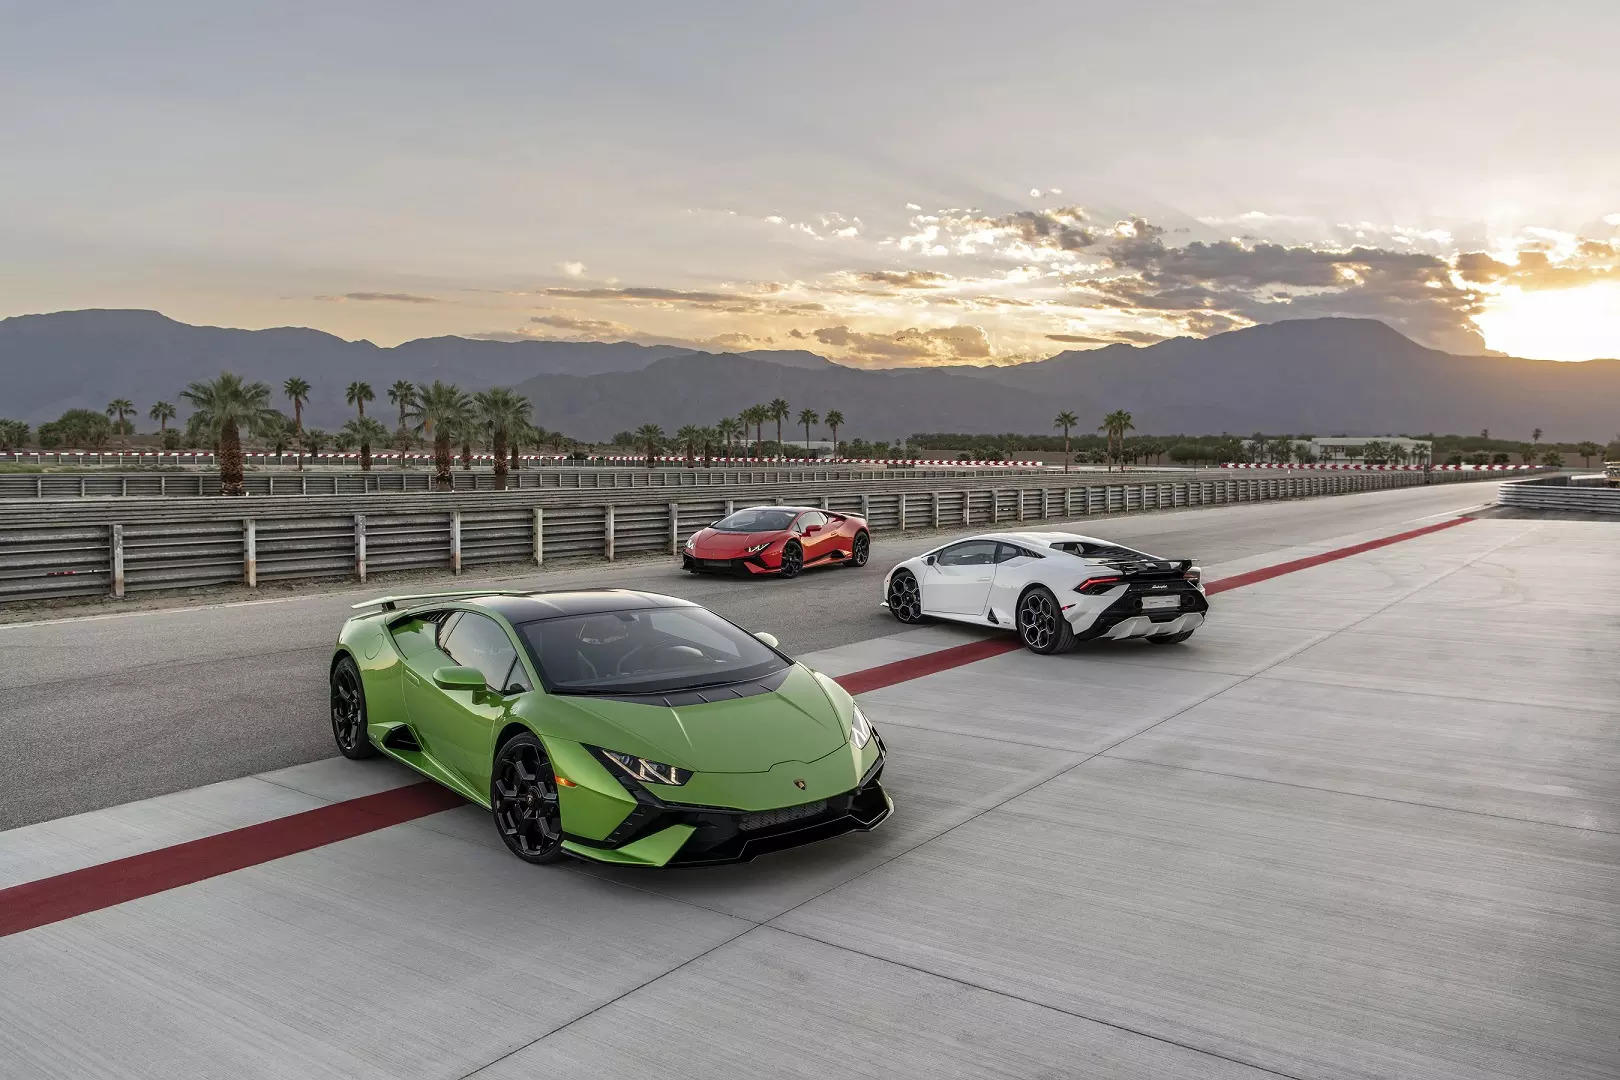 <p>Lamborghini also posted record-breaking figures in terms of turnover, which topped EUR 2 billion for the first time ever with a 56% increase in operating income compared to 2021.</p>